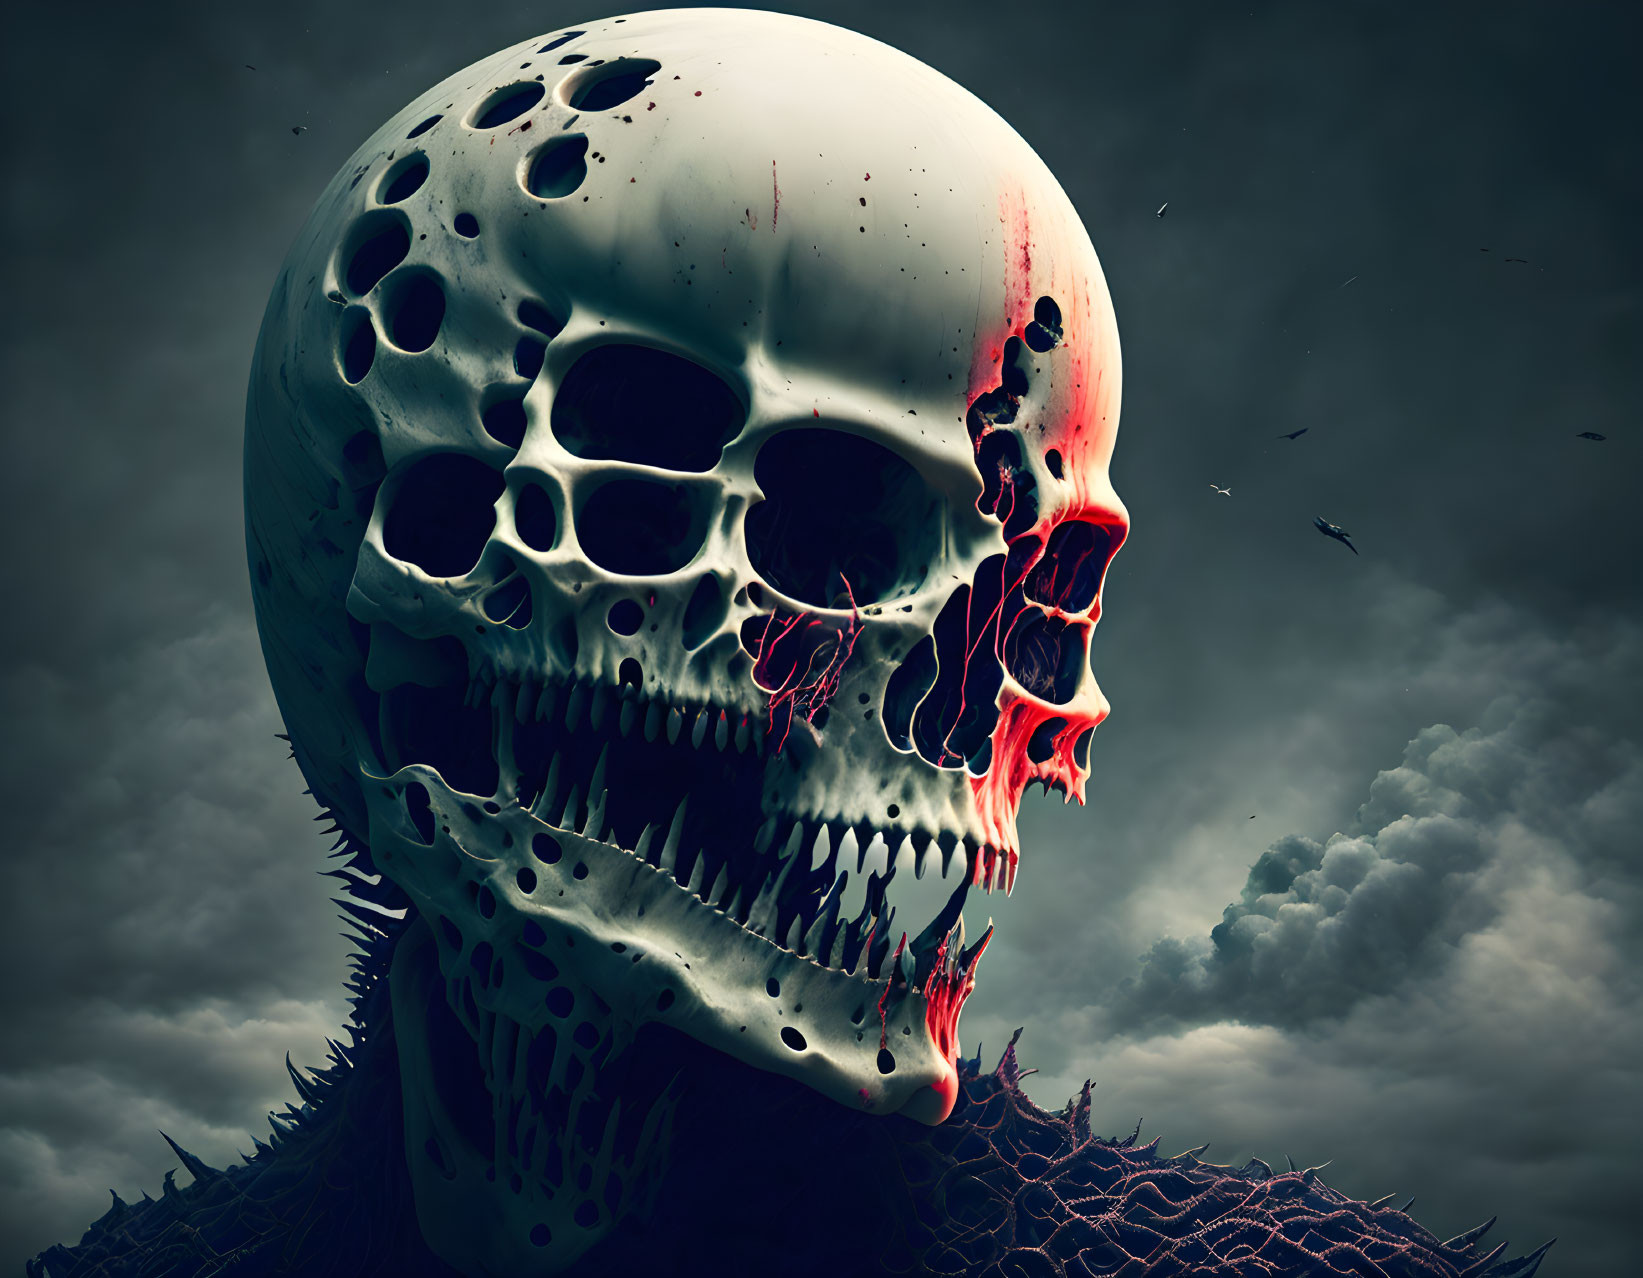 Surreal skull with multiple eye sockets oozing blood under stormy sky